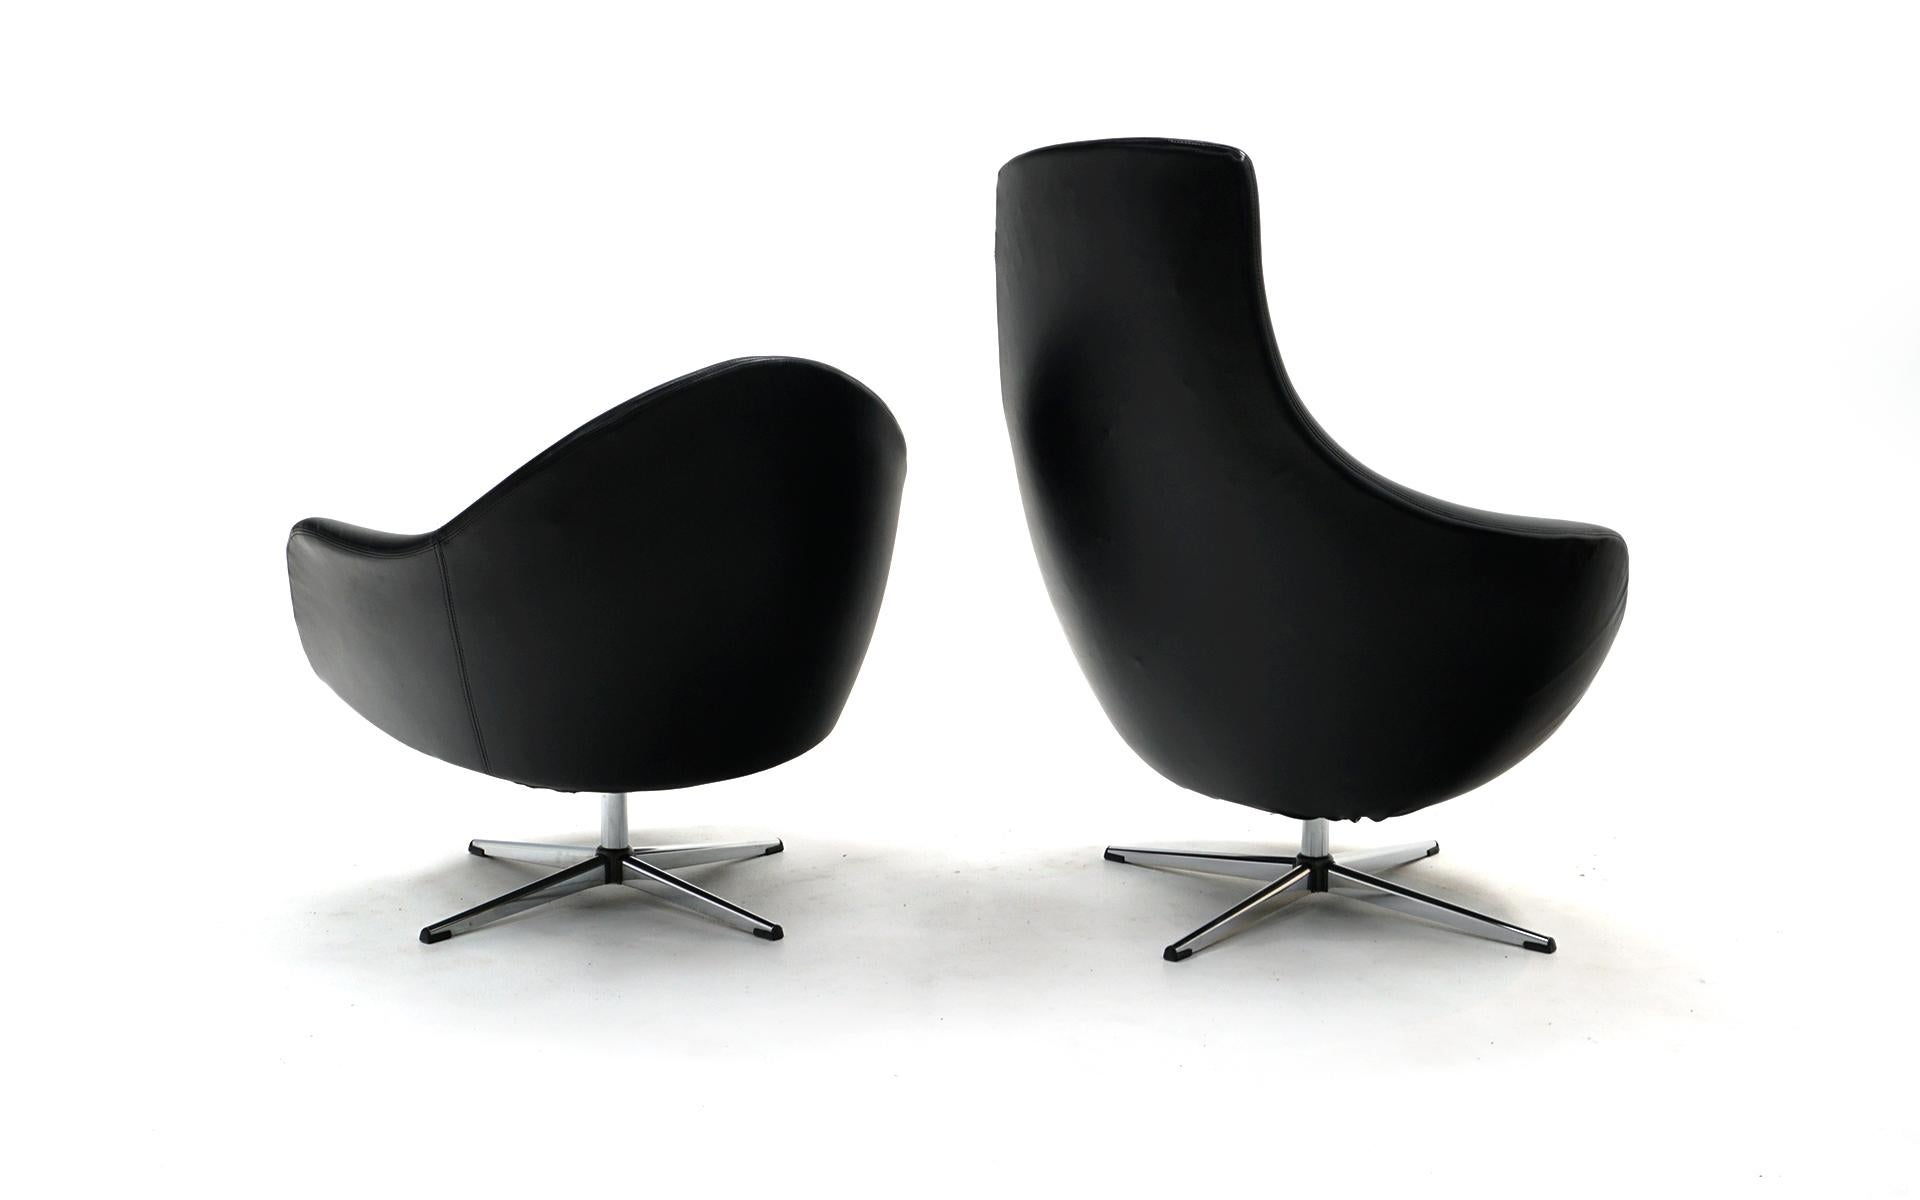 Mid-Century Modern Black Swivel Chairs by Overman, One High Back, One Standard, Ready to Use, Pair